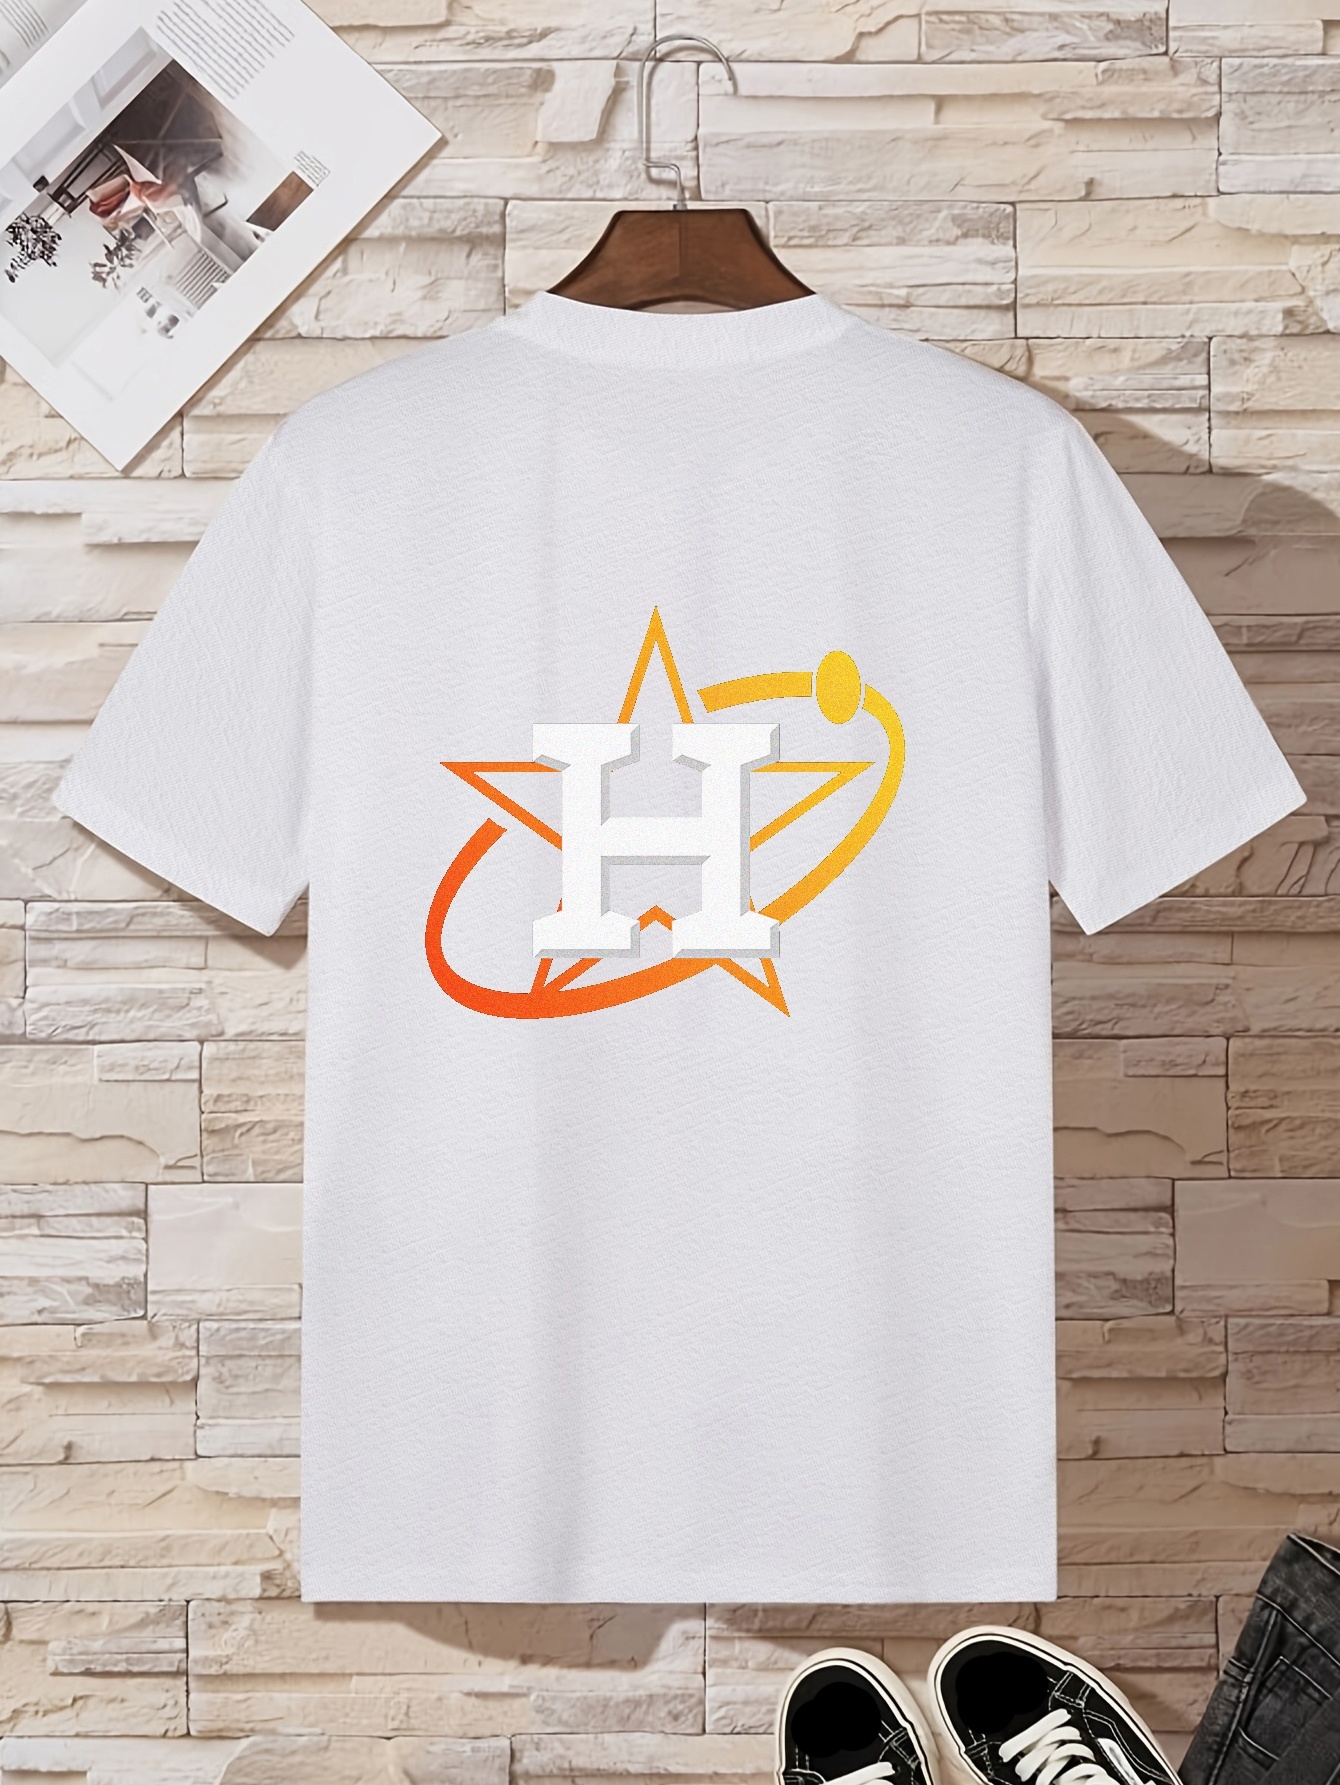  Cheating Astros graphic t-shirt : Handmade Products